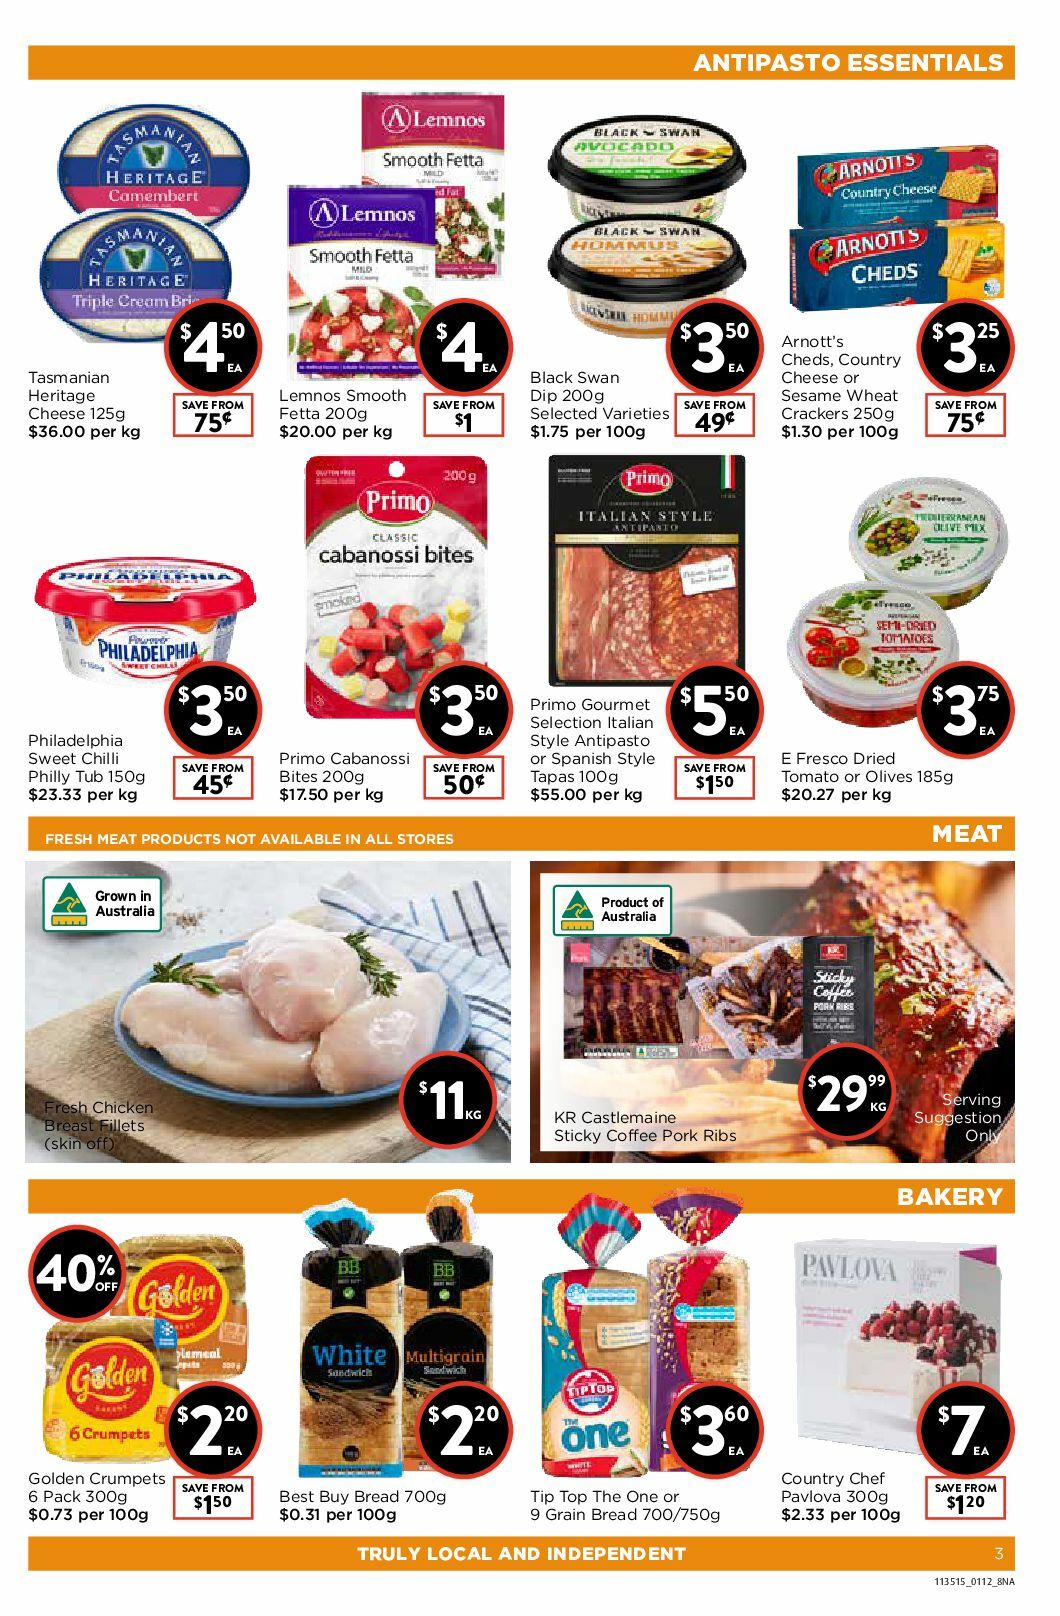 FoodWorks Catalogues from 1 December